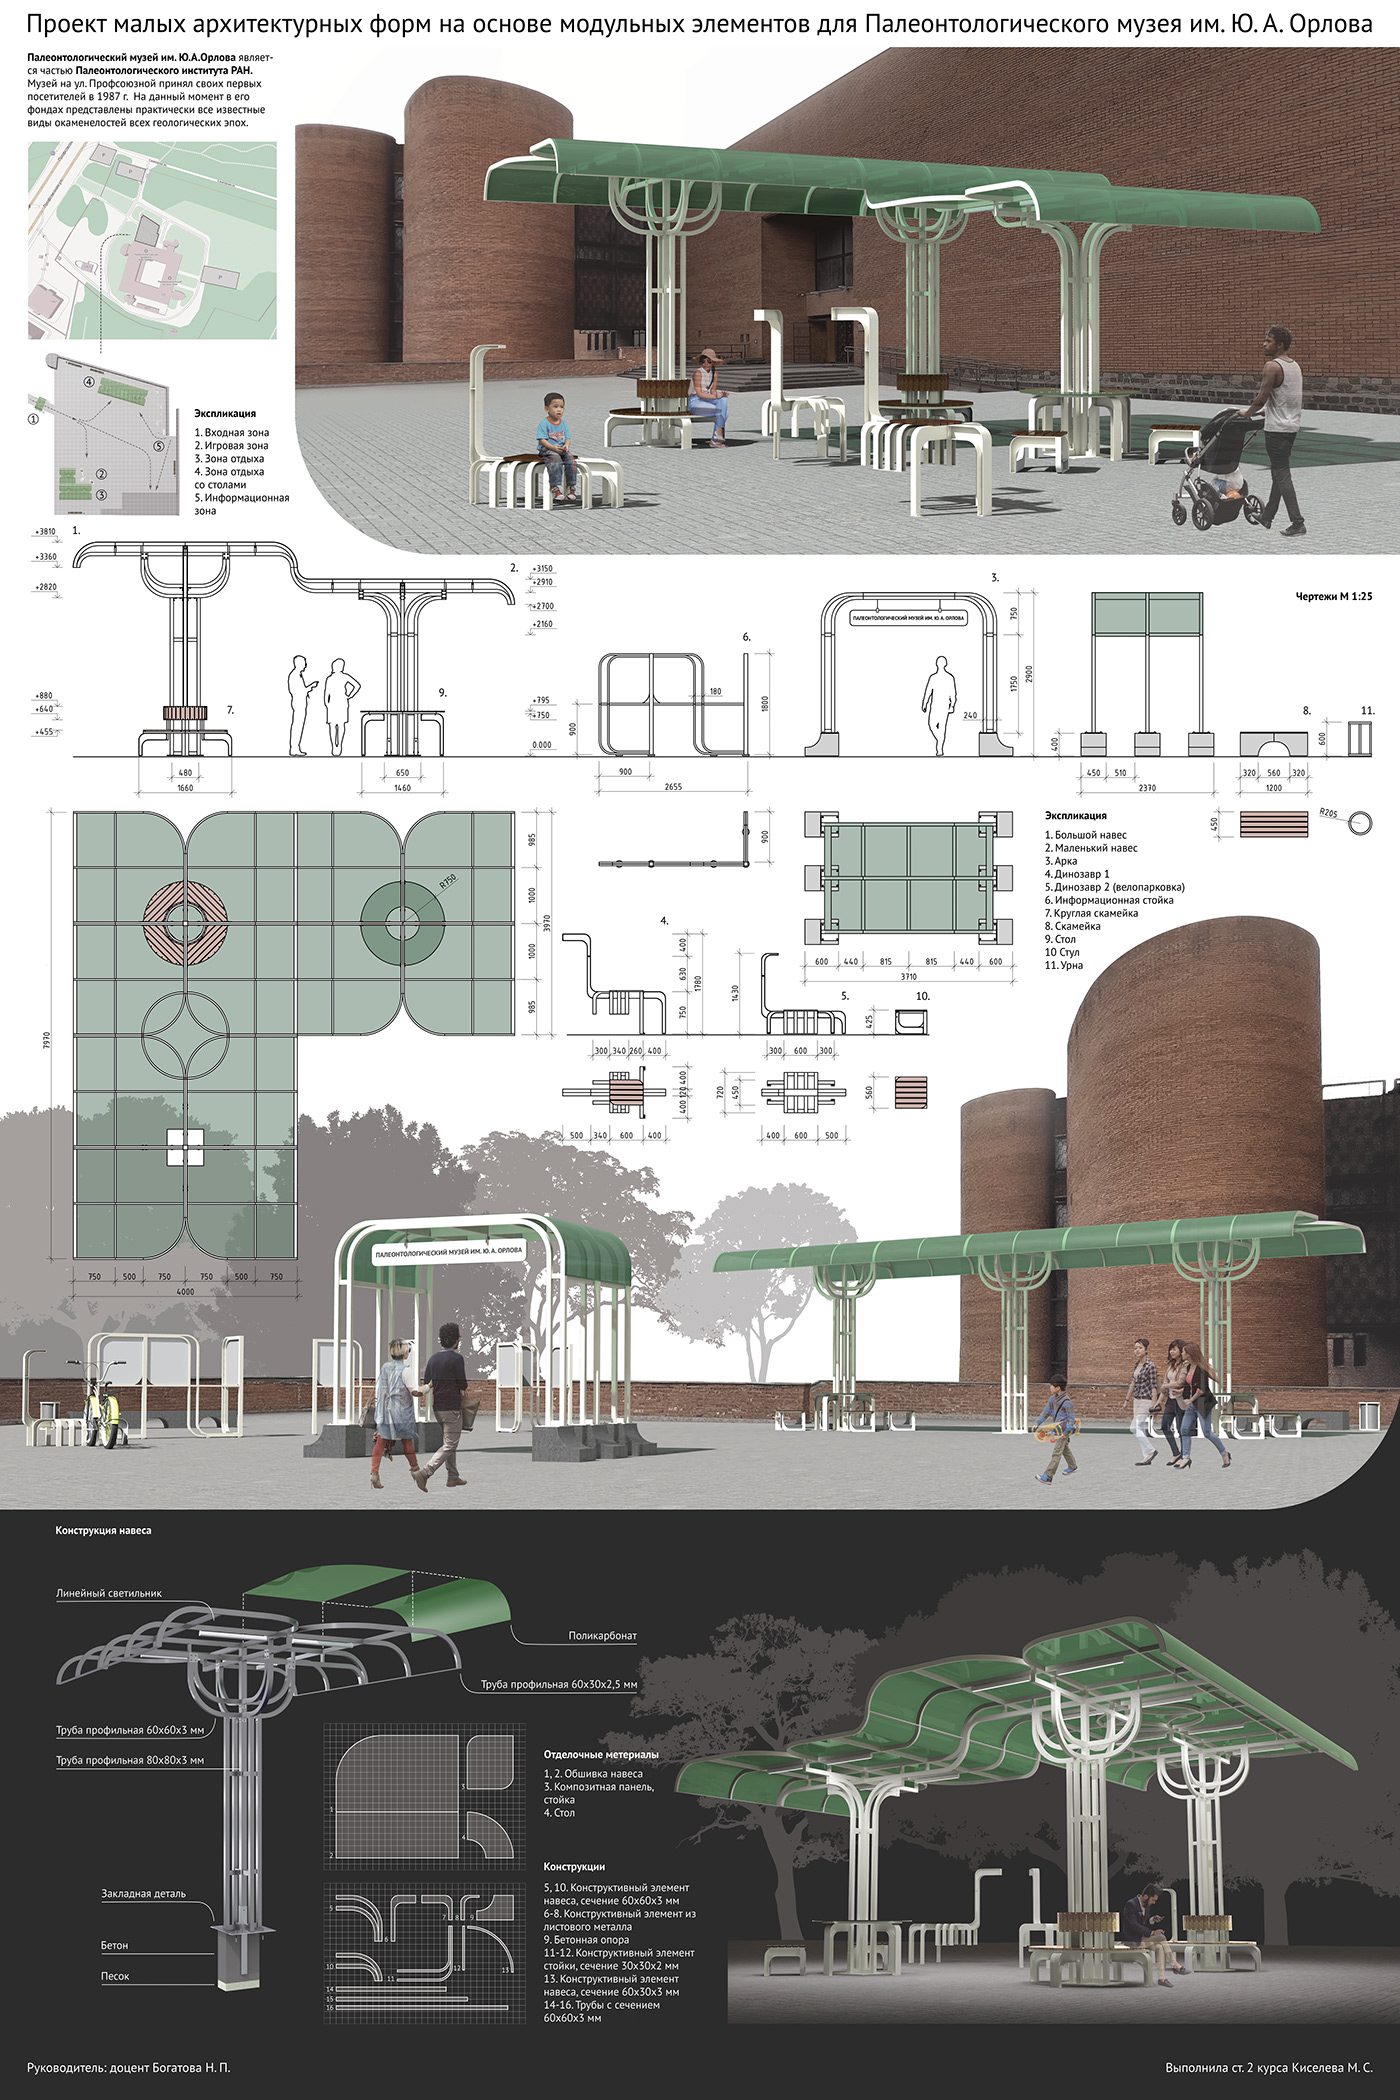 Project of small architectural forms for the paleontological museum